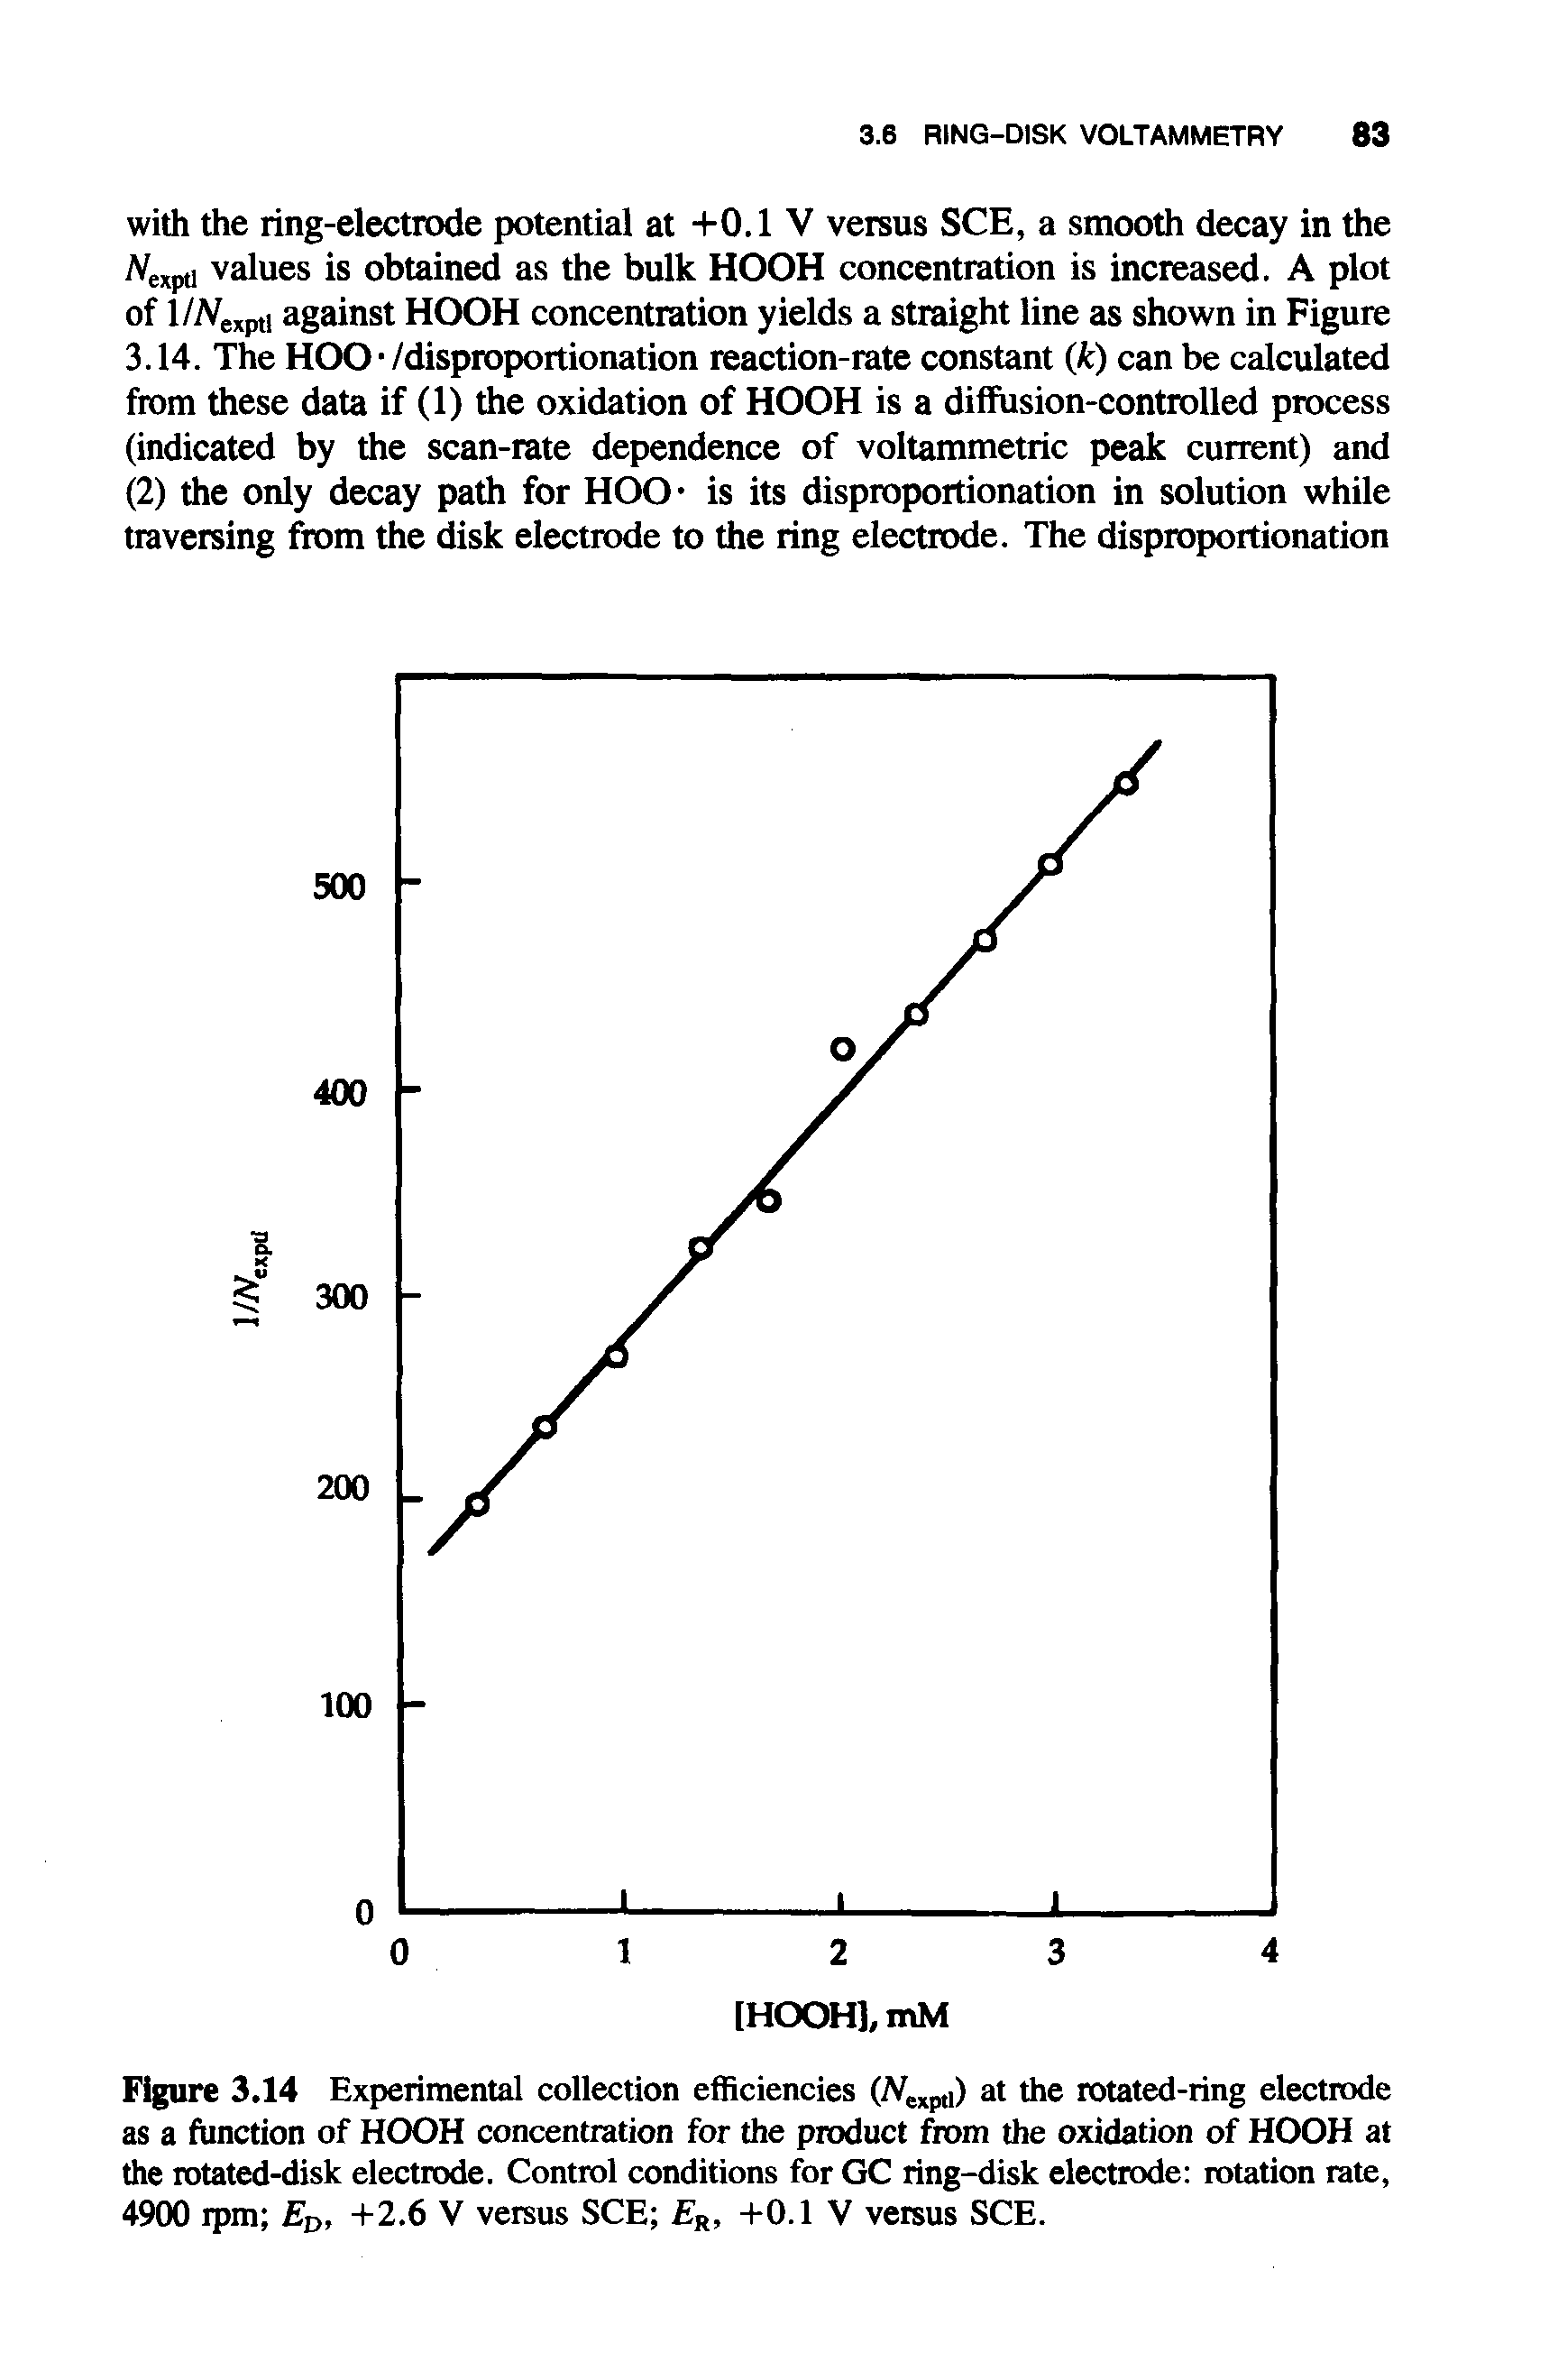 Figure 3.14 Experimental collection efficiencies (Nexpti) at the rotated-ring electrode as a function of HOOH concentration for the product from the oxidation of HOOH at the rotated-disk electrode. Control conditions for GC ring-disk electrode rotation rate, 4900 ipm ED, +2.6 V versus SCE ER, +0.1 V versus SCE.